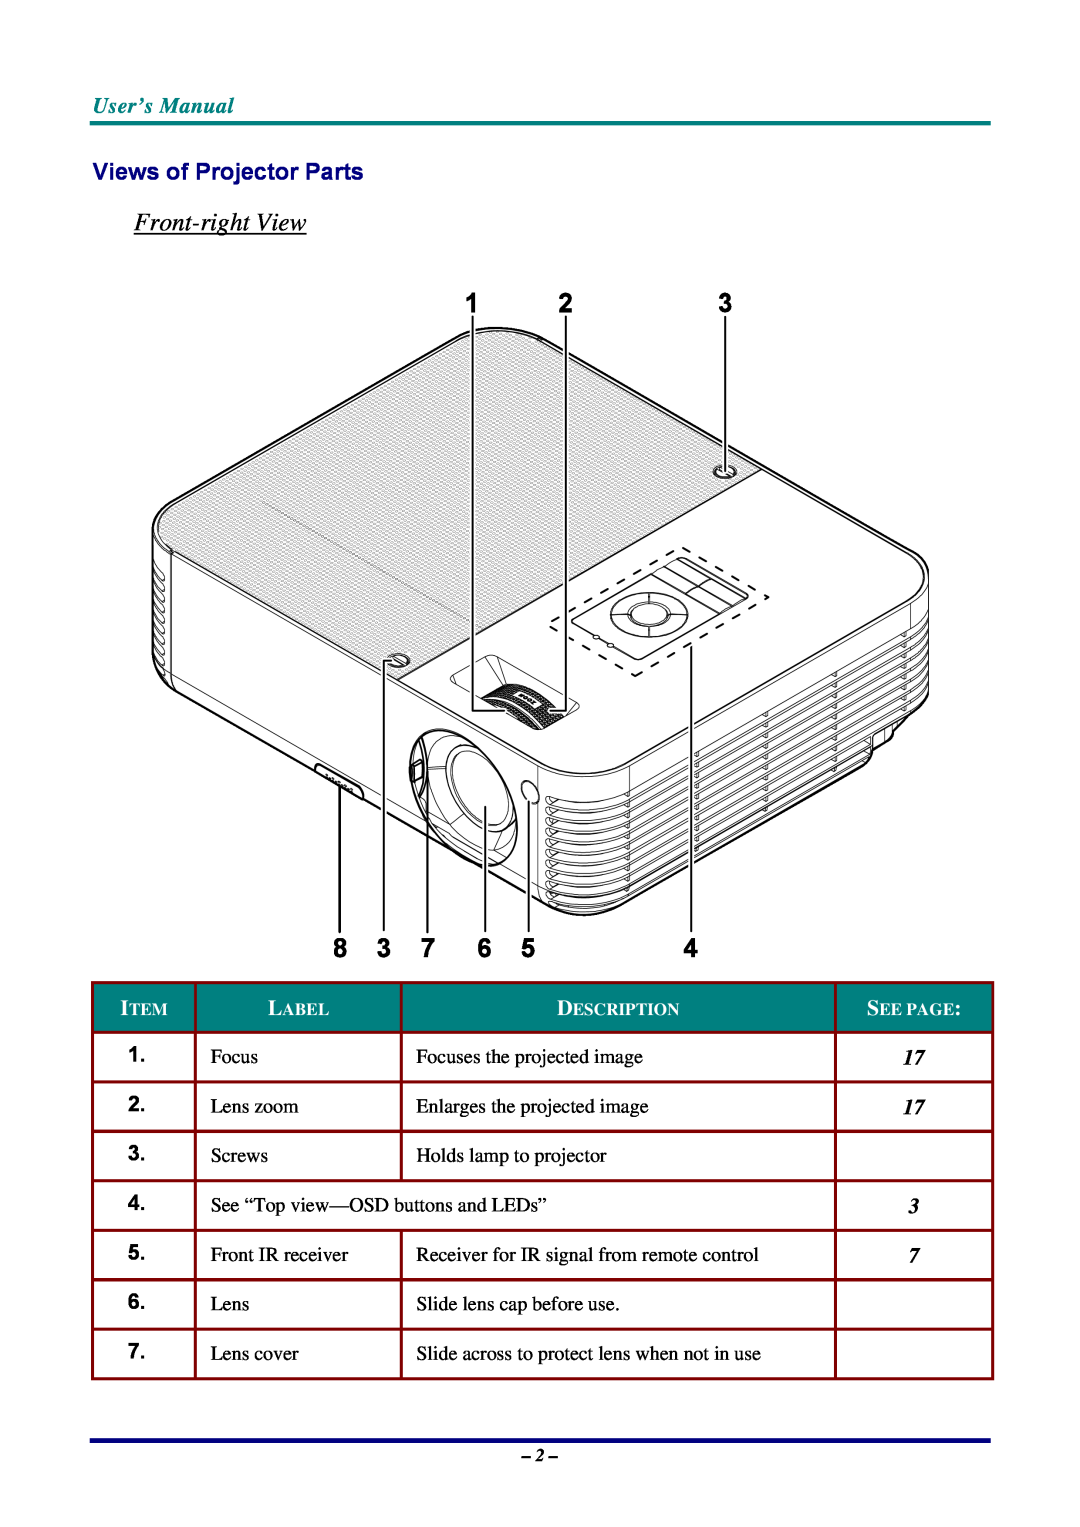 Planar PR3020, PR5020 manual Front-right View, Views of Projector Parts, User’s Manual 